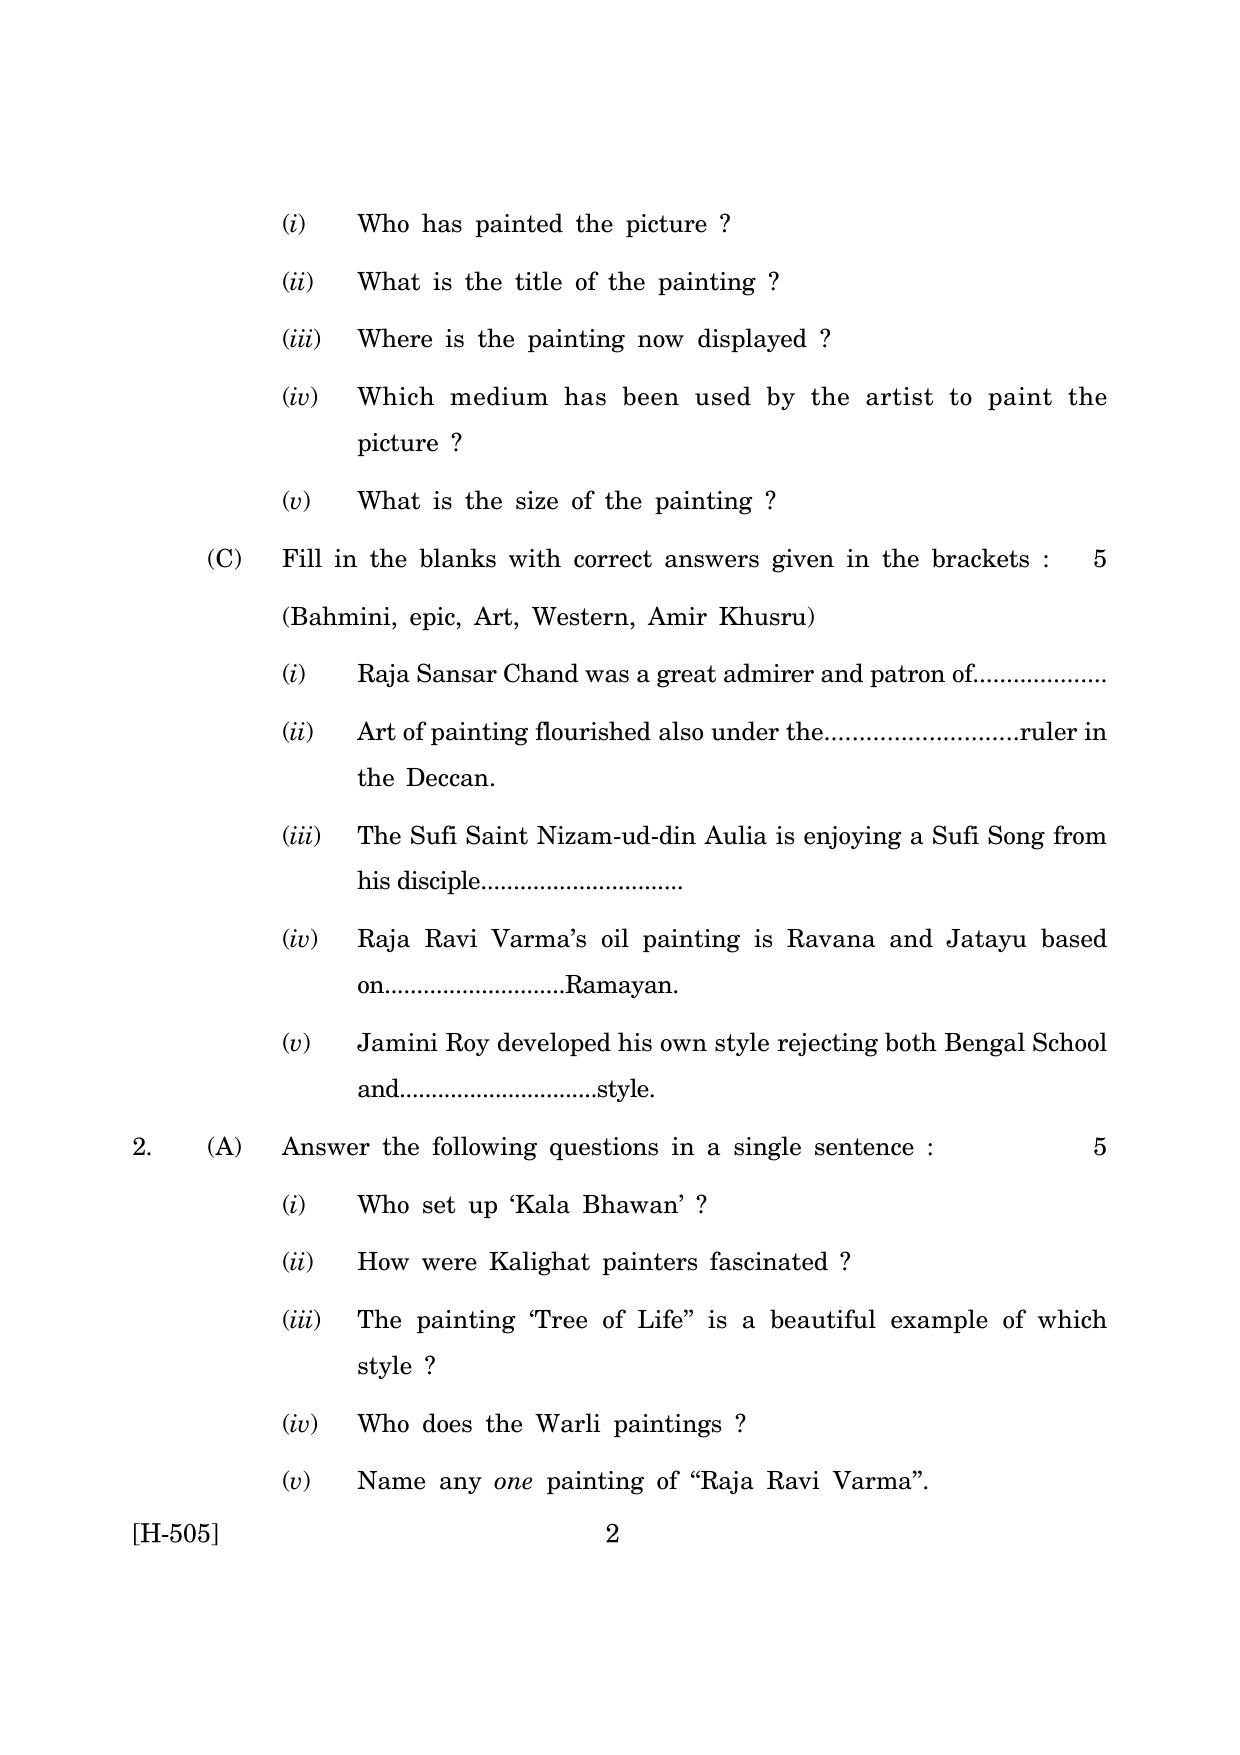 Goa Board Class 12 Painting   (March 2019) Question Paper - Page 2